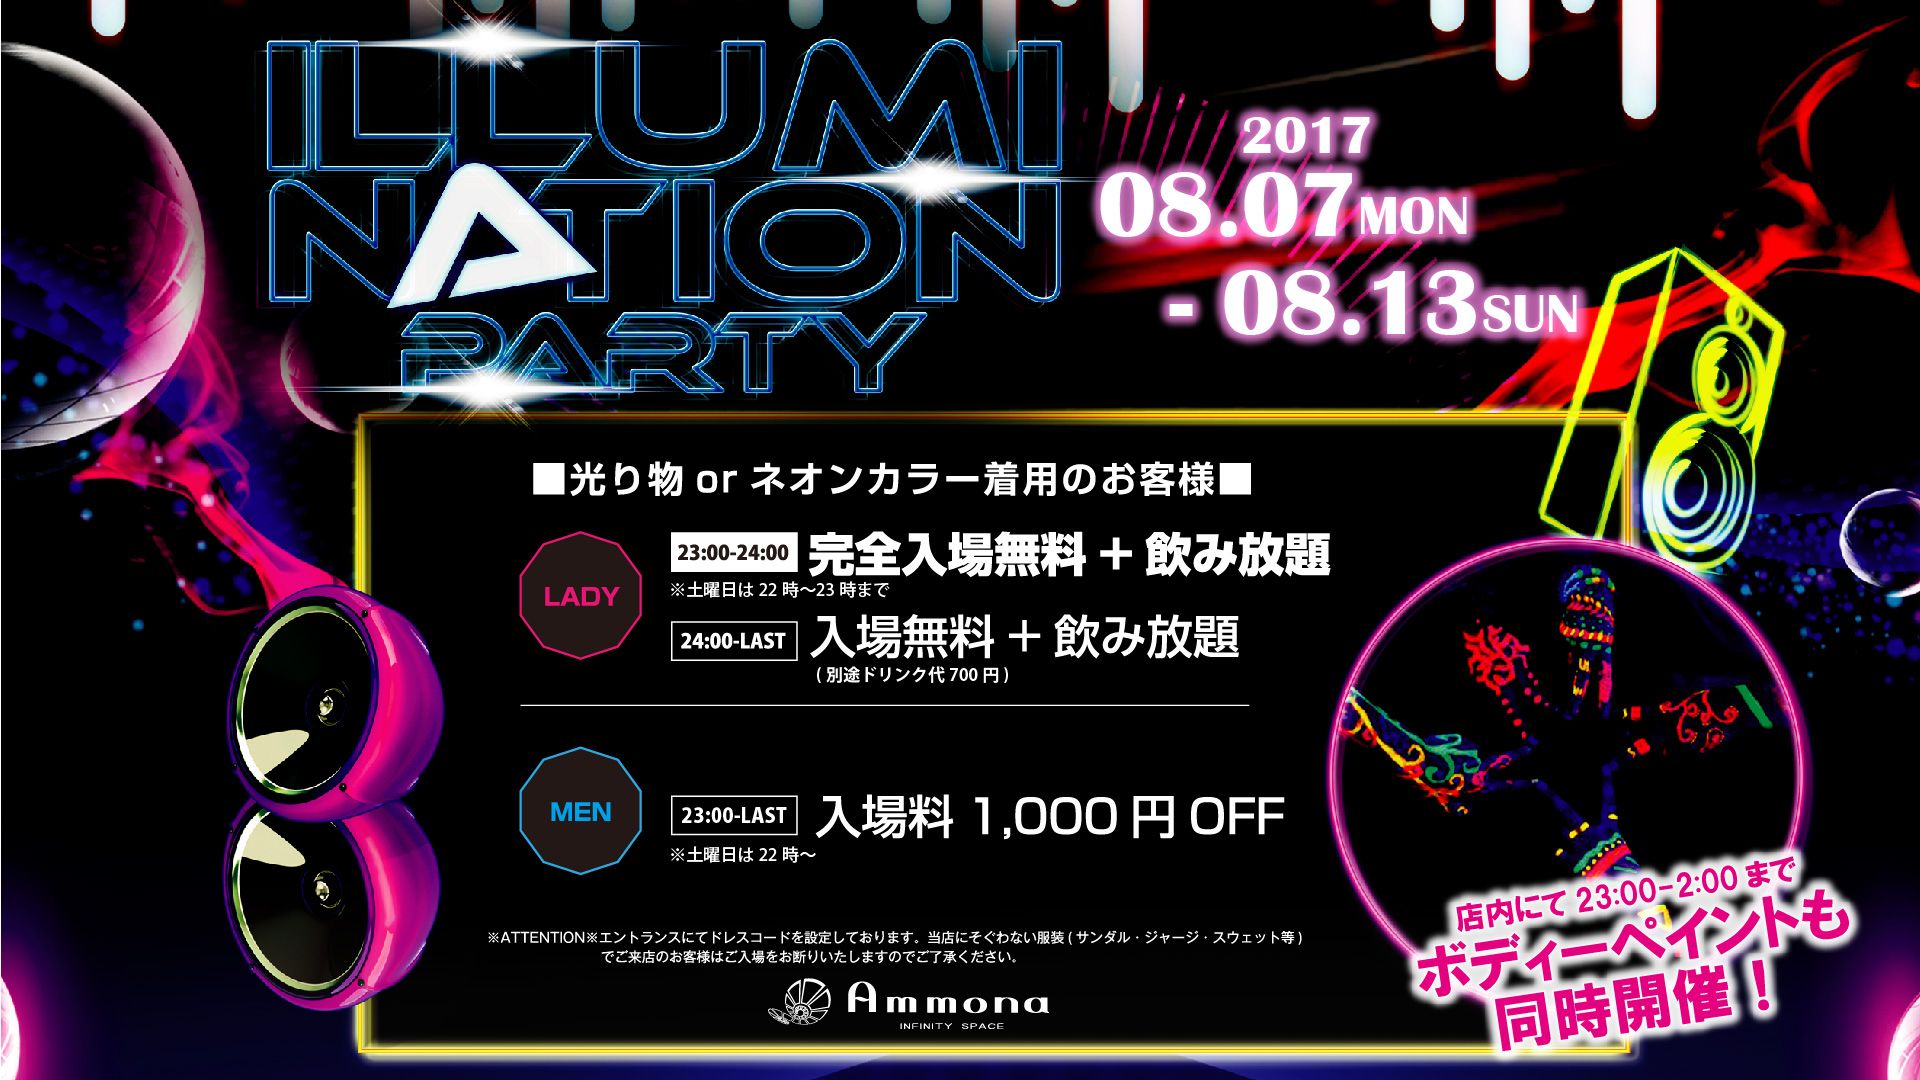 SPECIAL GUEST：DJケンイチ・TAK-Z / ILLUMINATION PARTY 